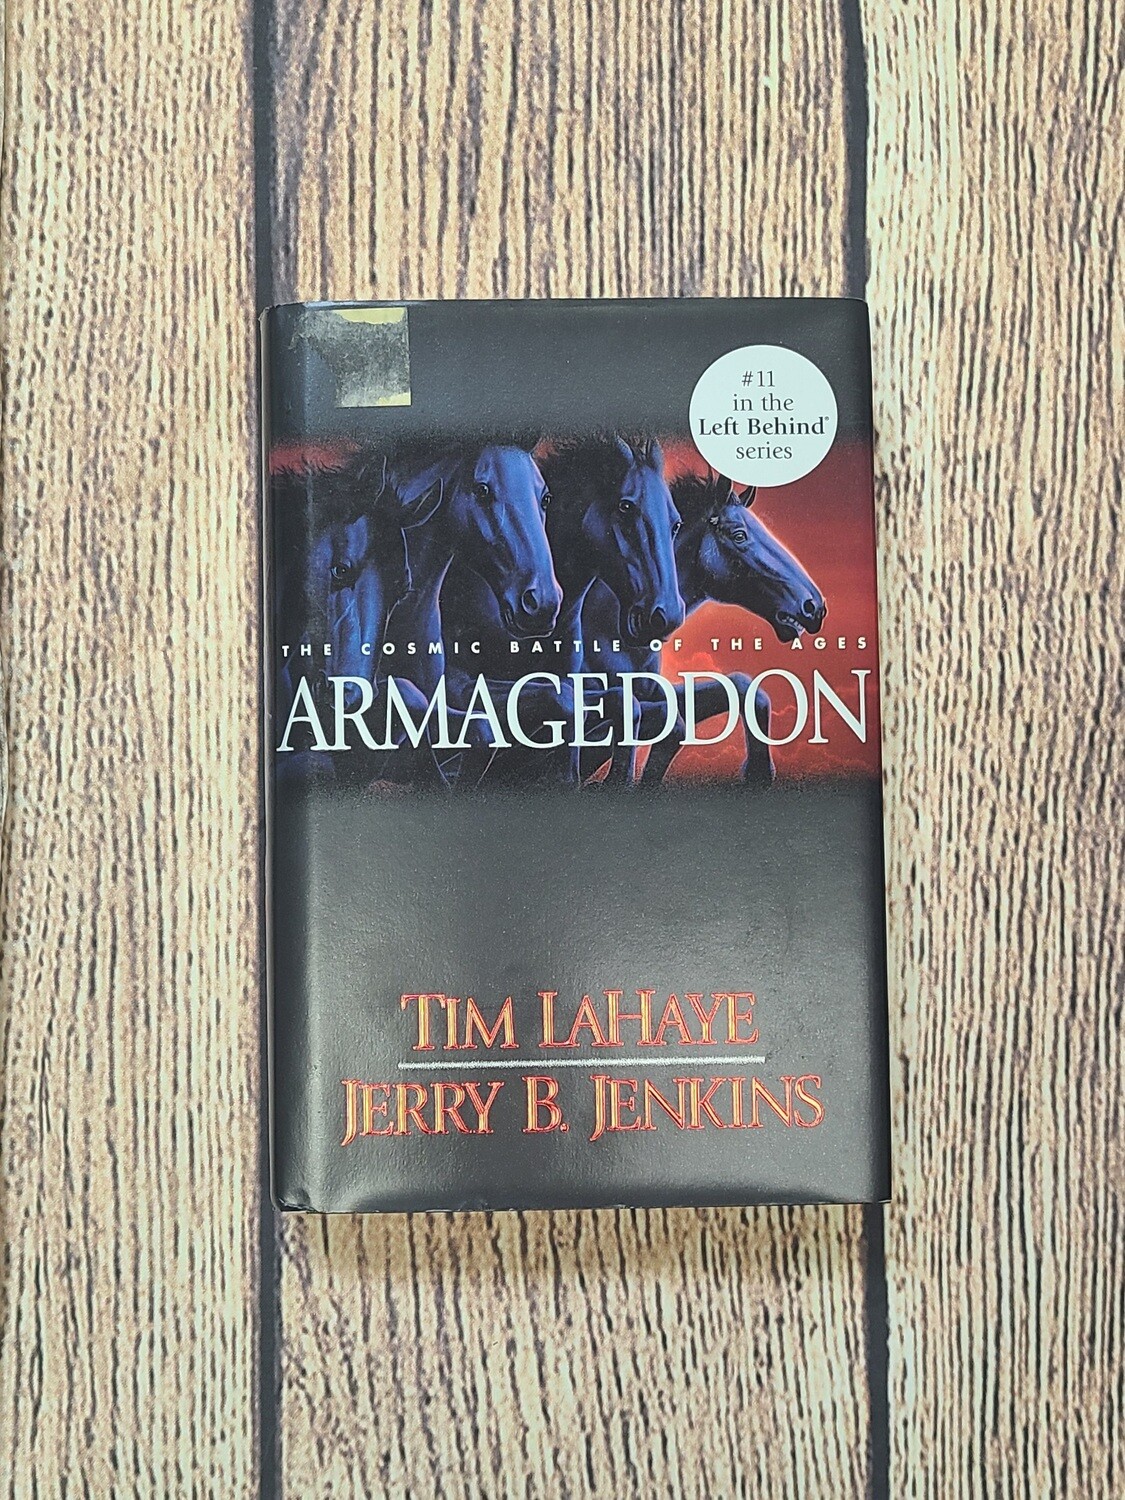 Armageddon: The Cosmic Battle of the Ages by Tim LaHaye & Jerry B. Jenkins